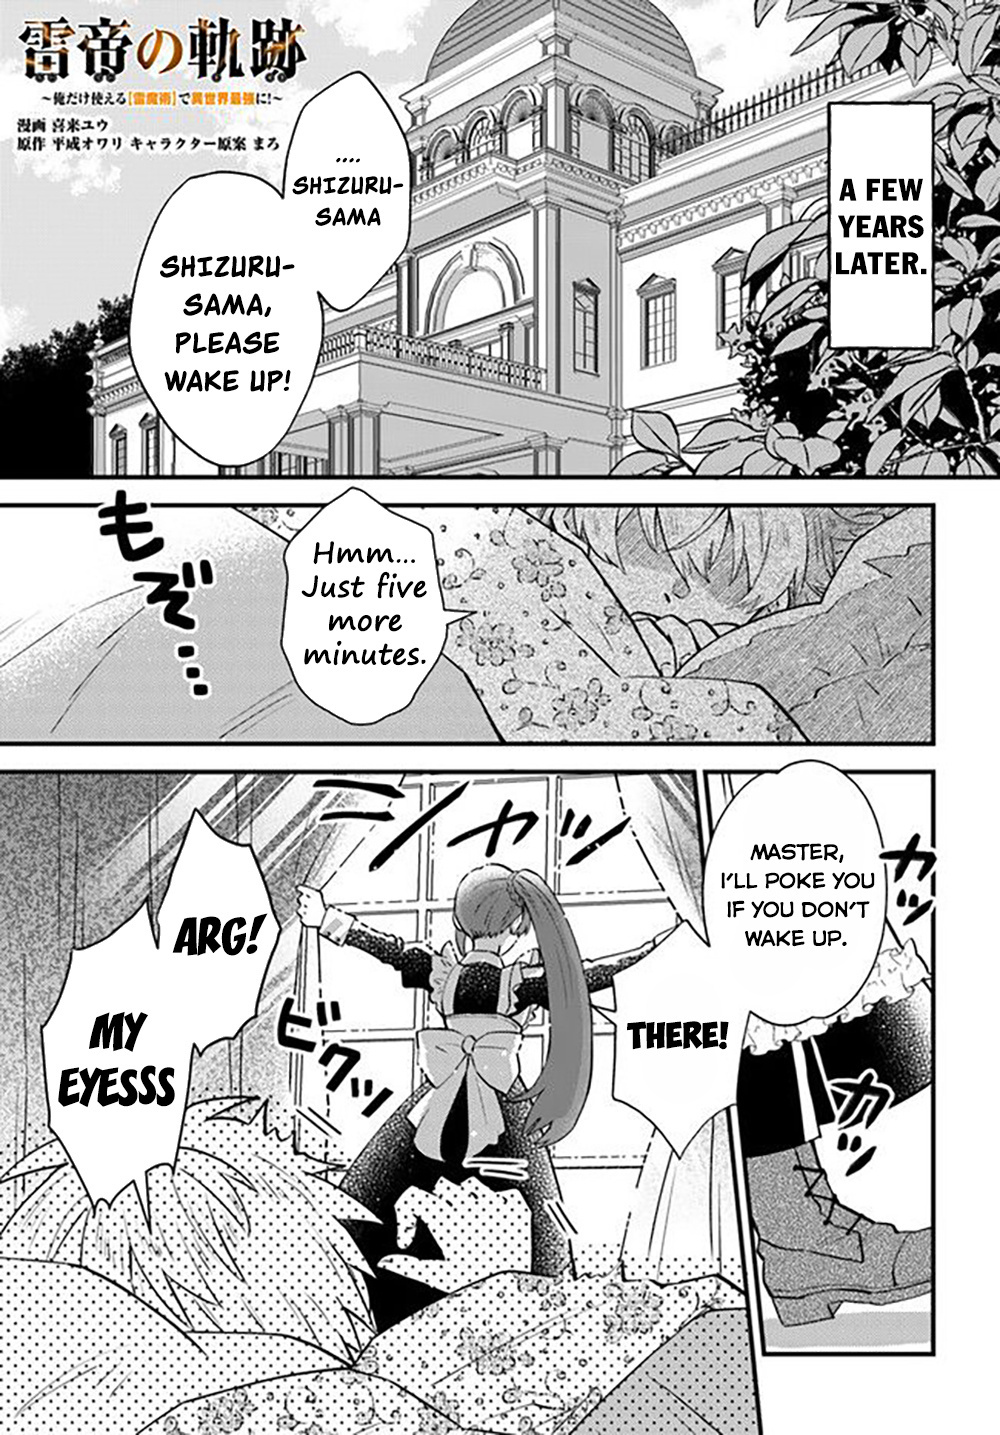 Path Of The Thunder Emperor ~Becoming The Strongest In Another World With [Thunder Magic] Which Only I Can Use! - Page 2